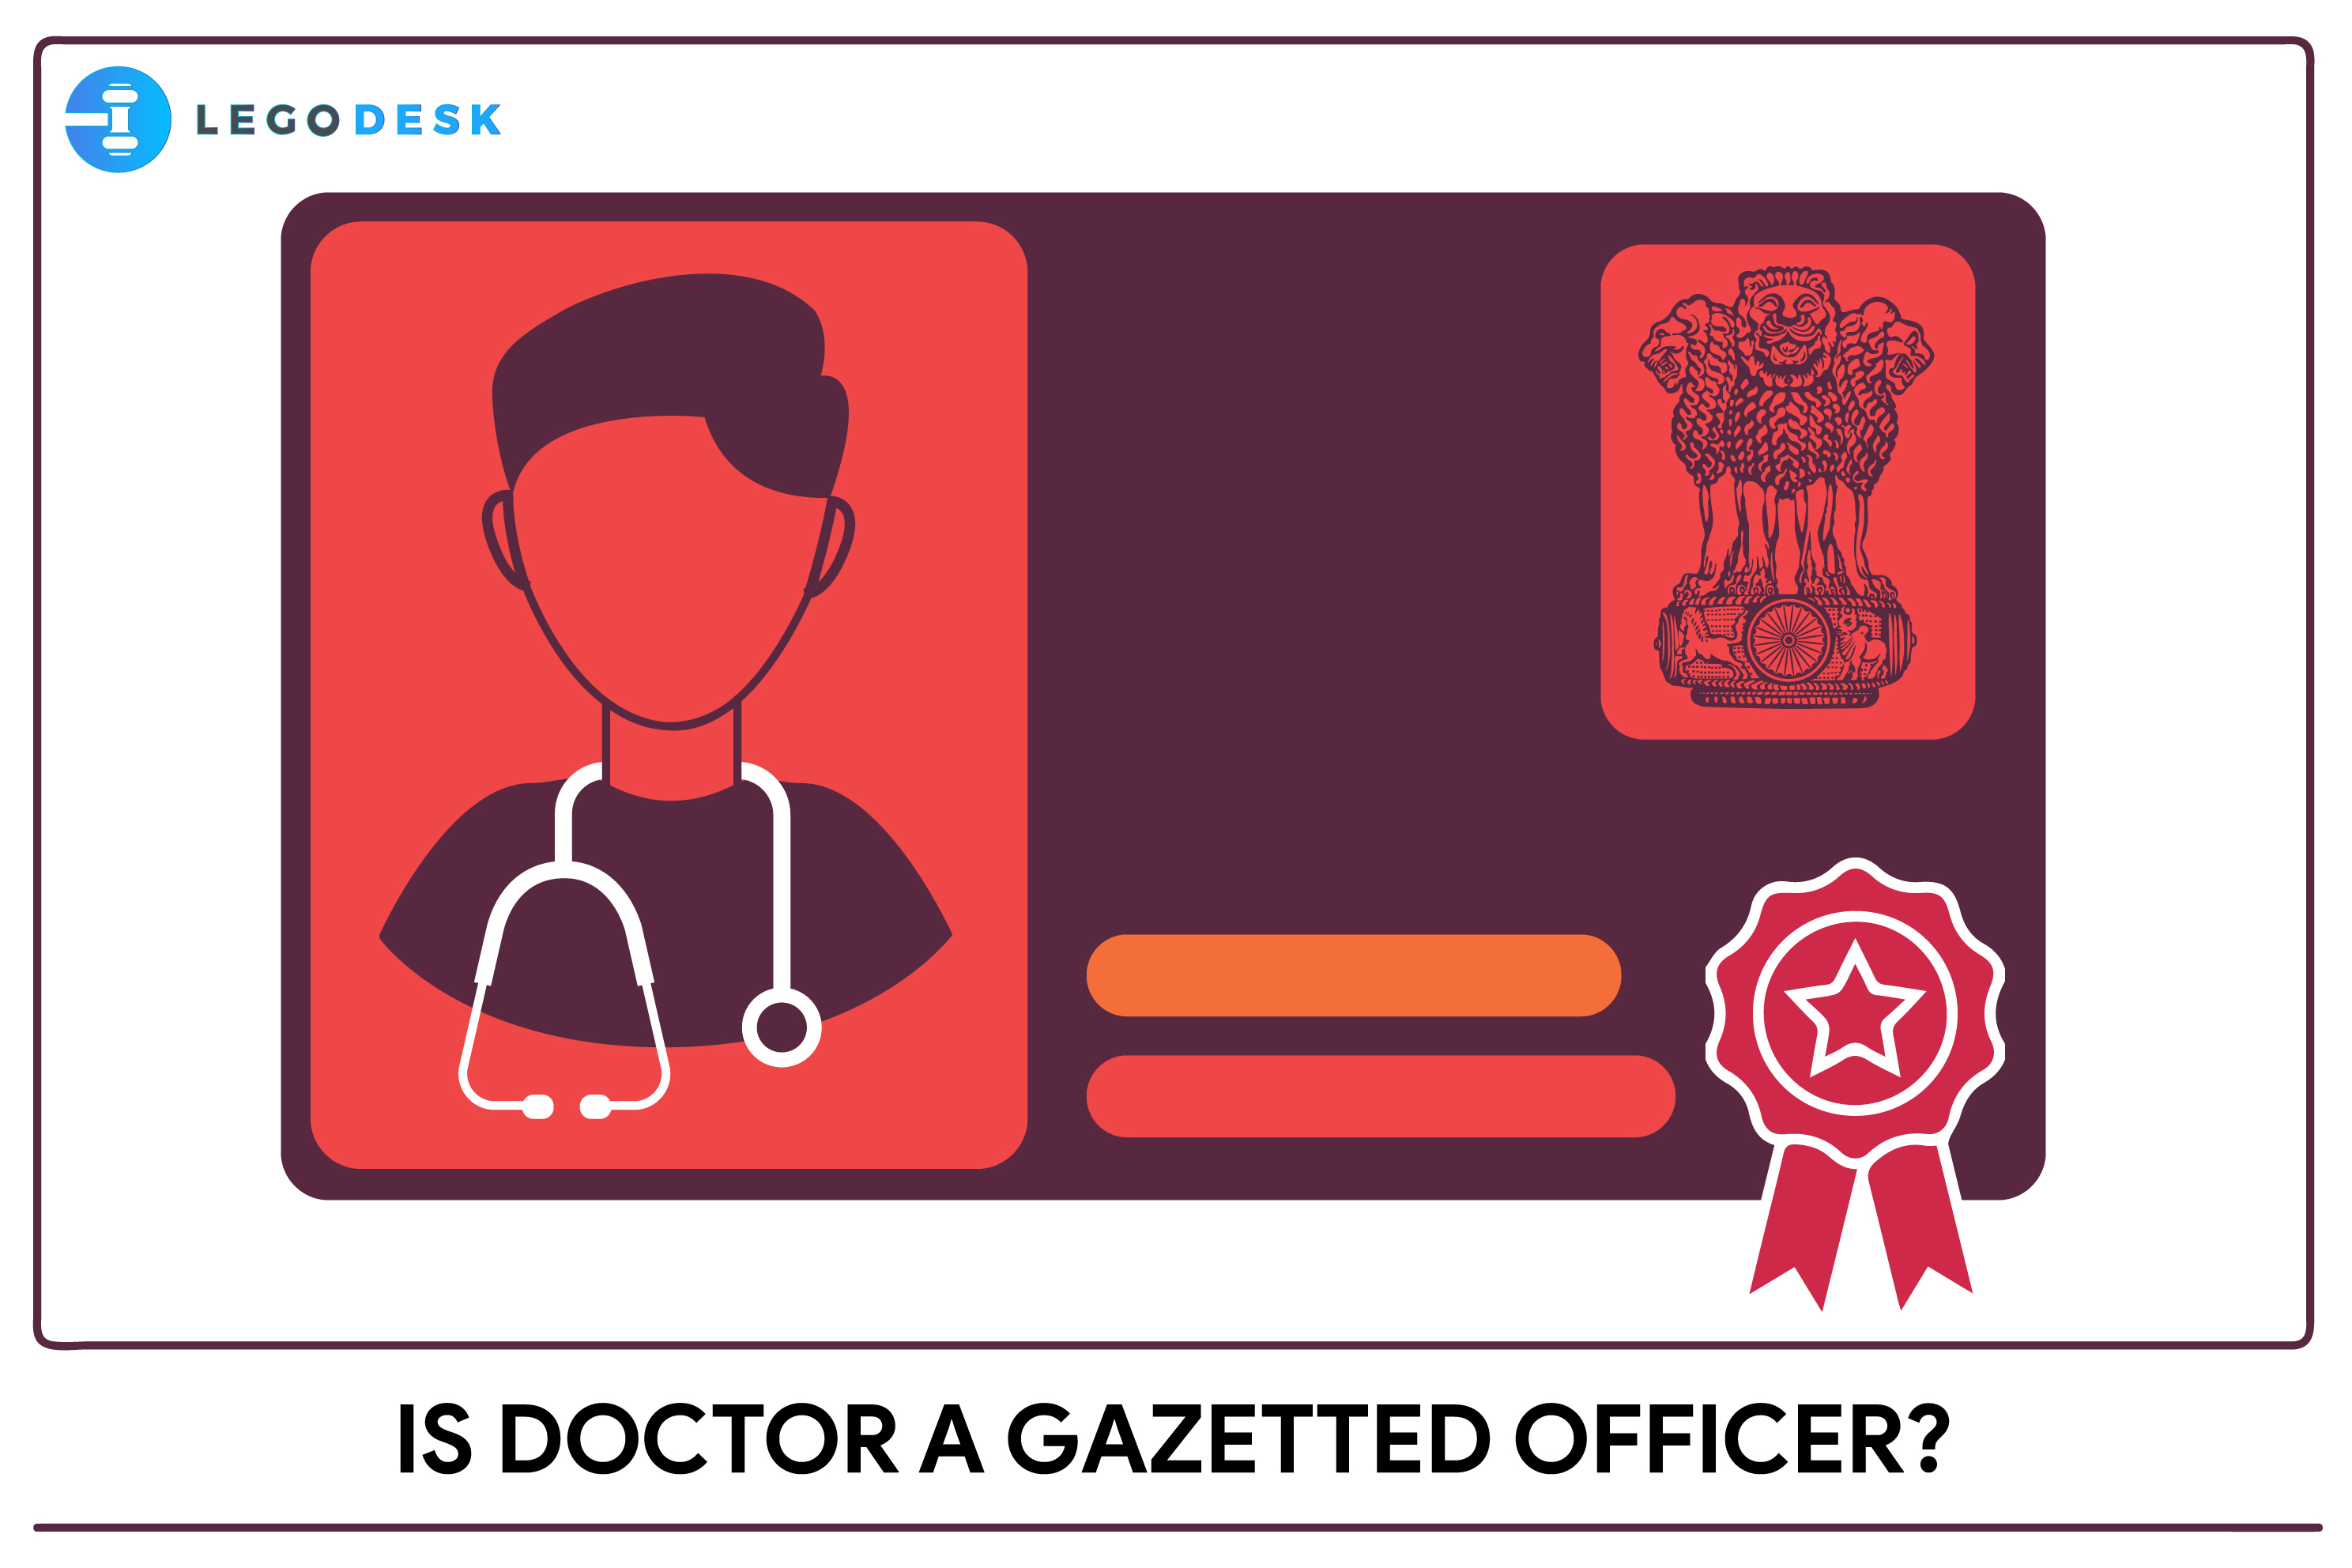 Is doctor a gazetted officer?